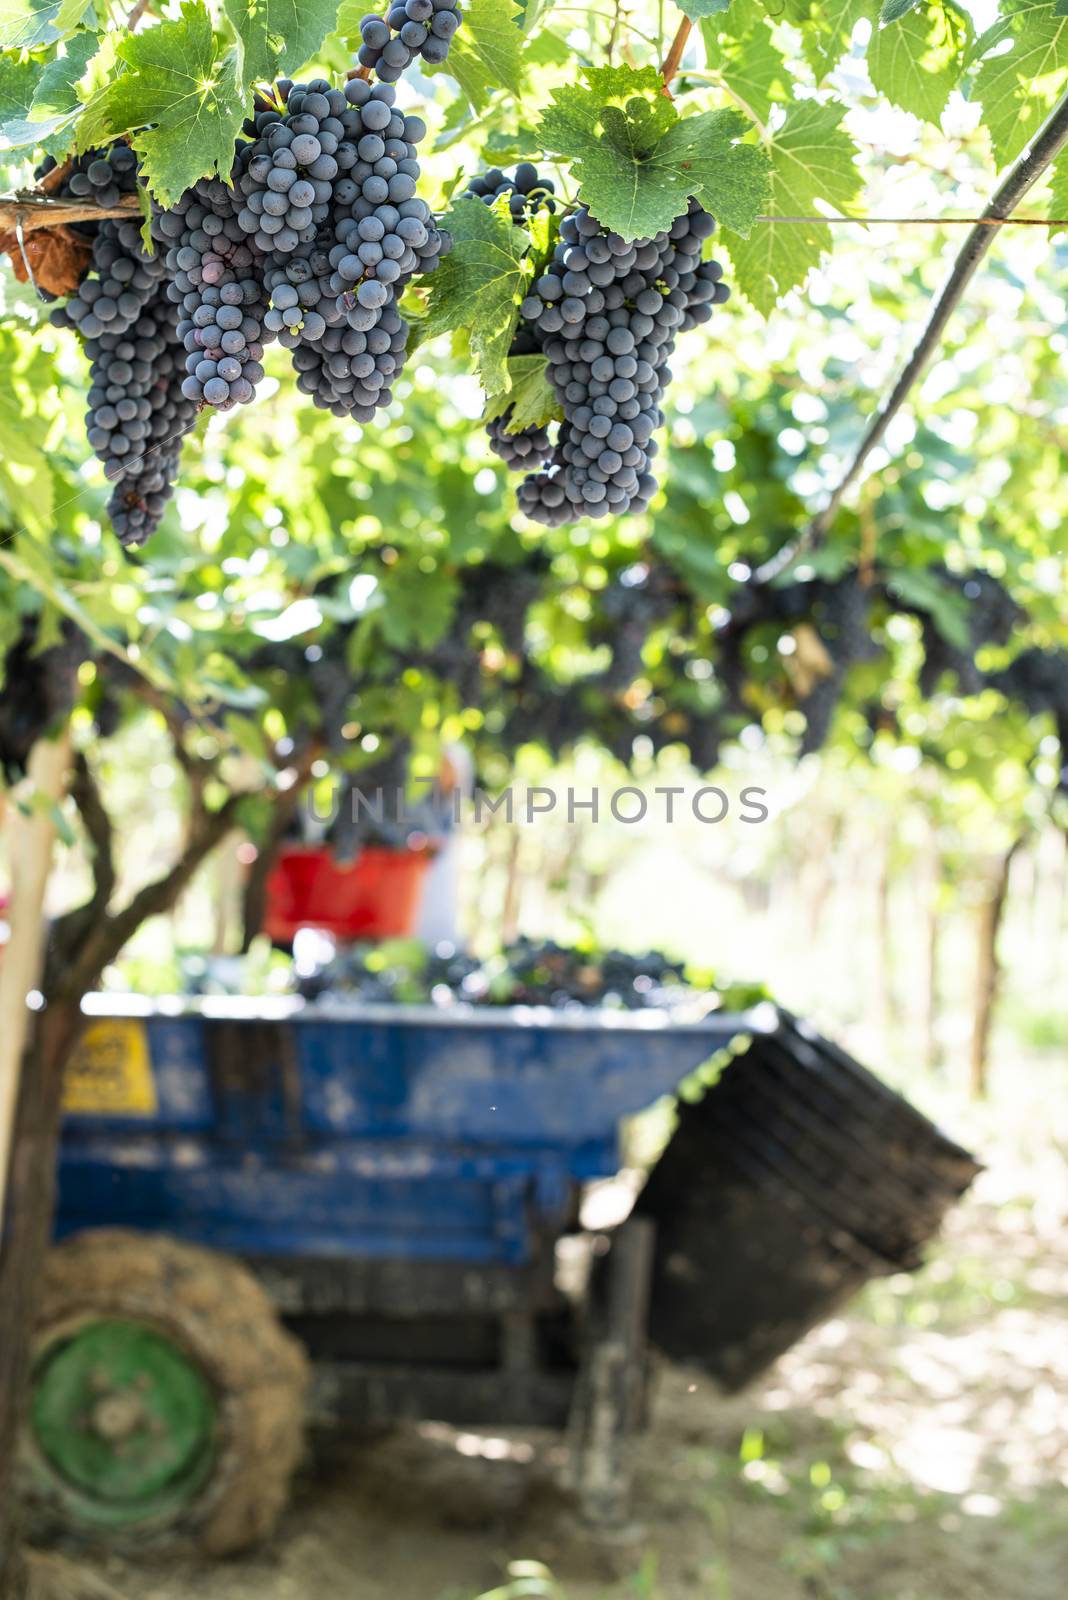 Tractor with trailer filled with red grapes for wine making. Concept for harvesting grapes in vineyard. Inside vineyards.